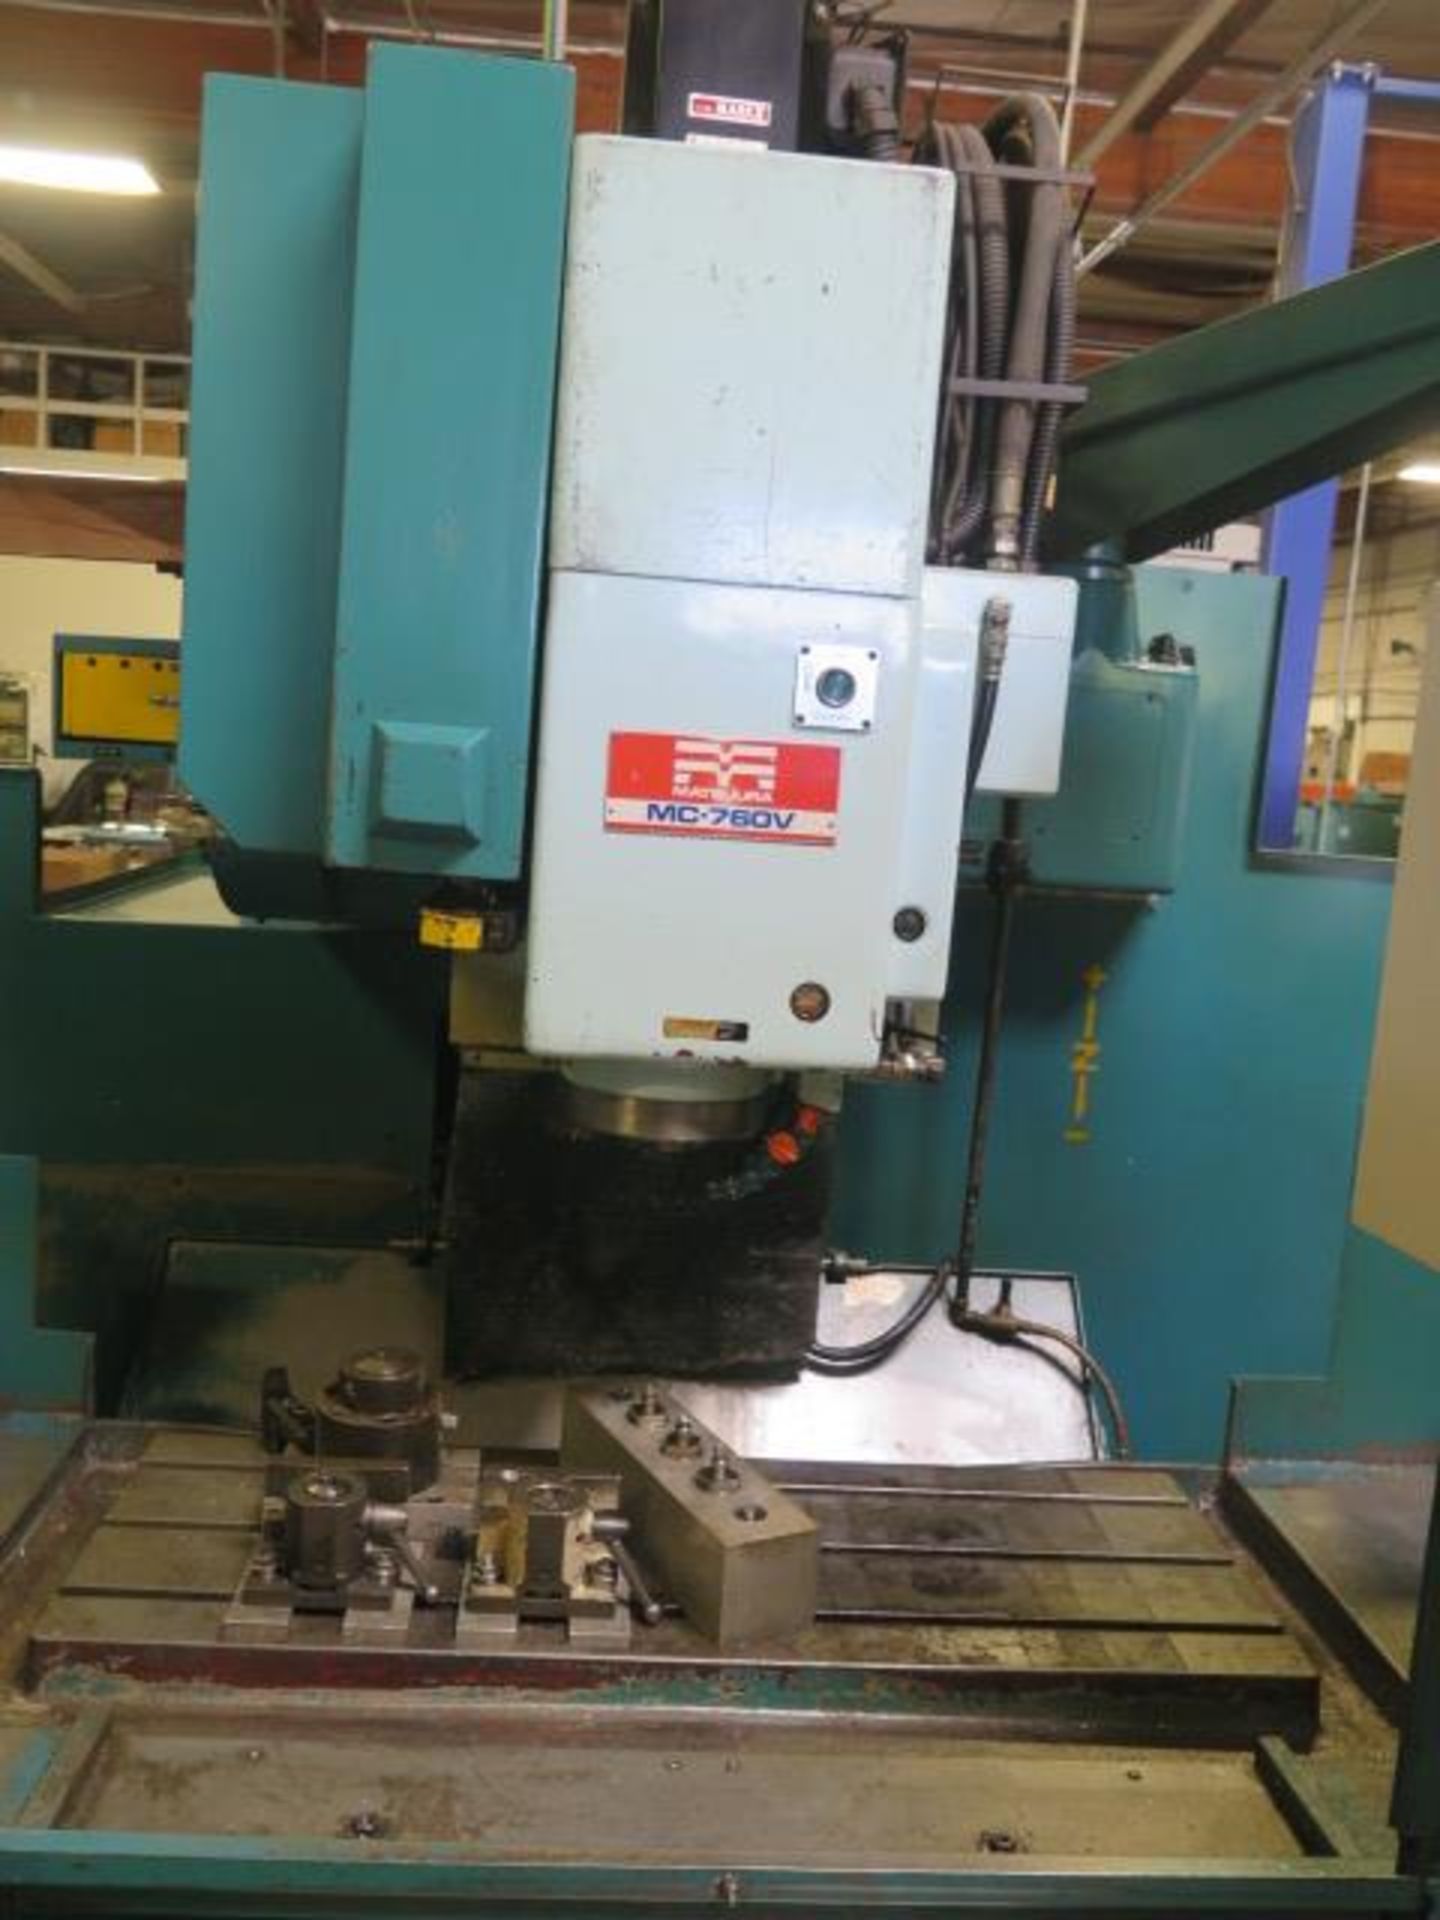 Matsuura MC-760V CNC VMC s/n 85054941 w/ Yasnac MX2 Controls, 30-Station, SOLD AS IS - Image 4 of 11